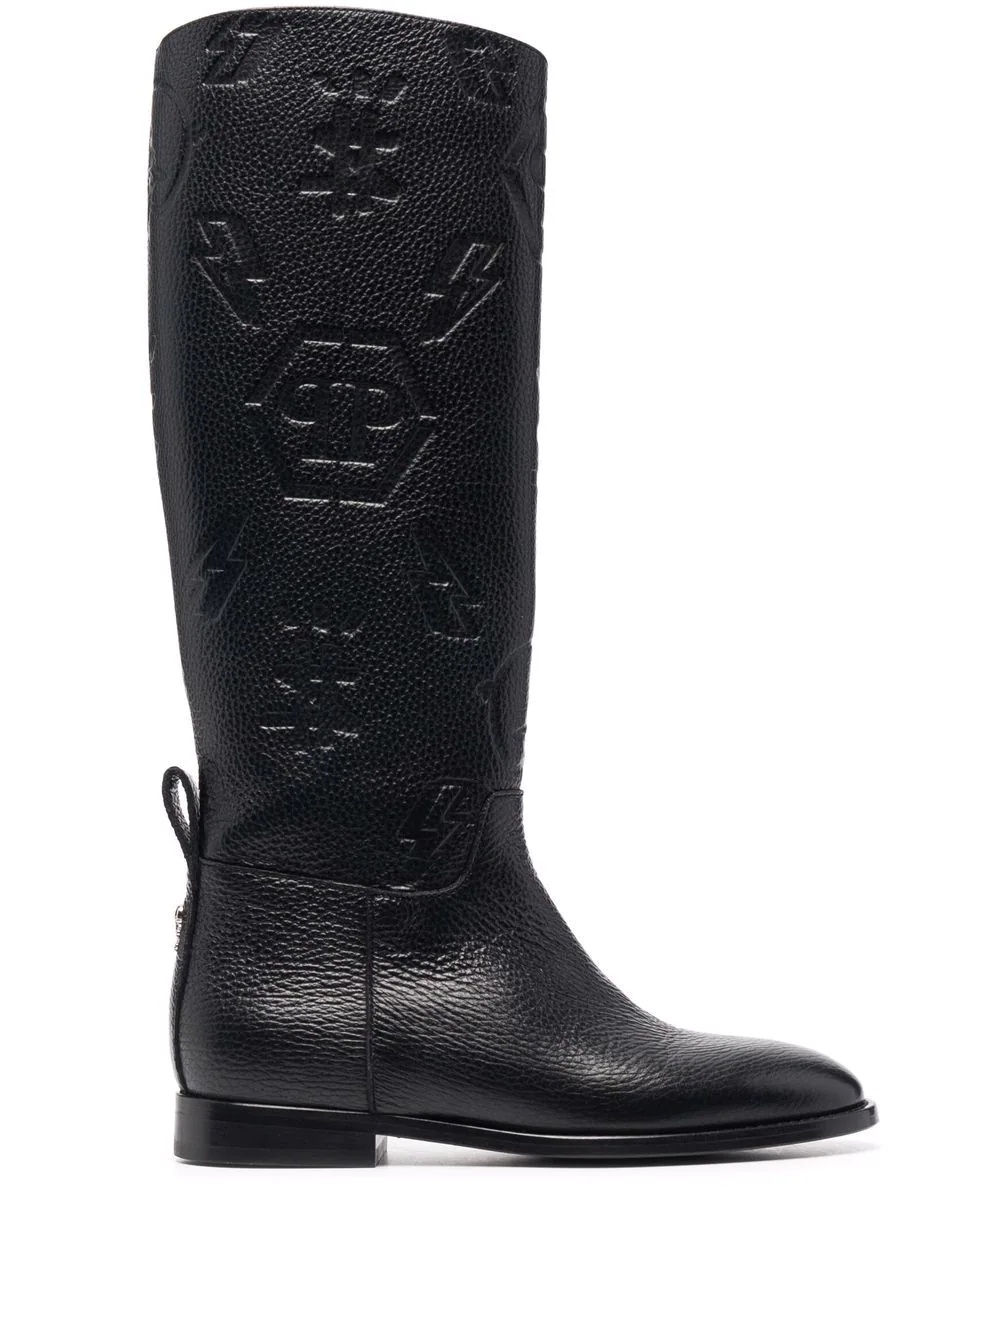 embossed-logo knee-high boots - 1